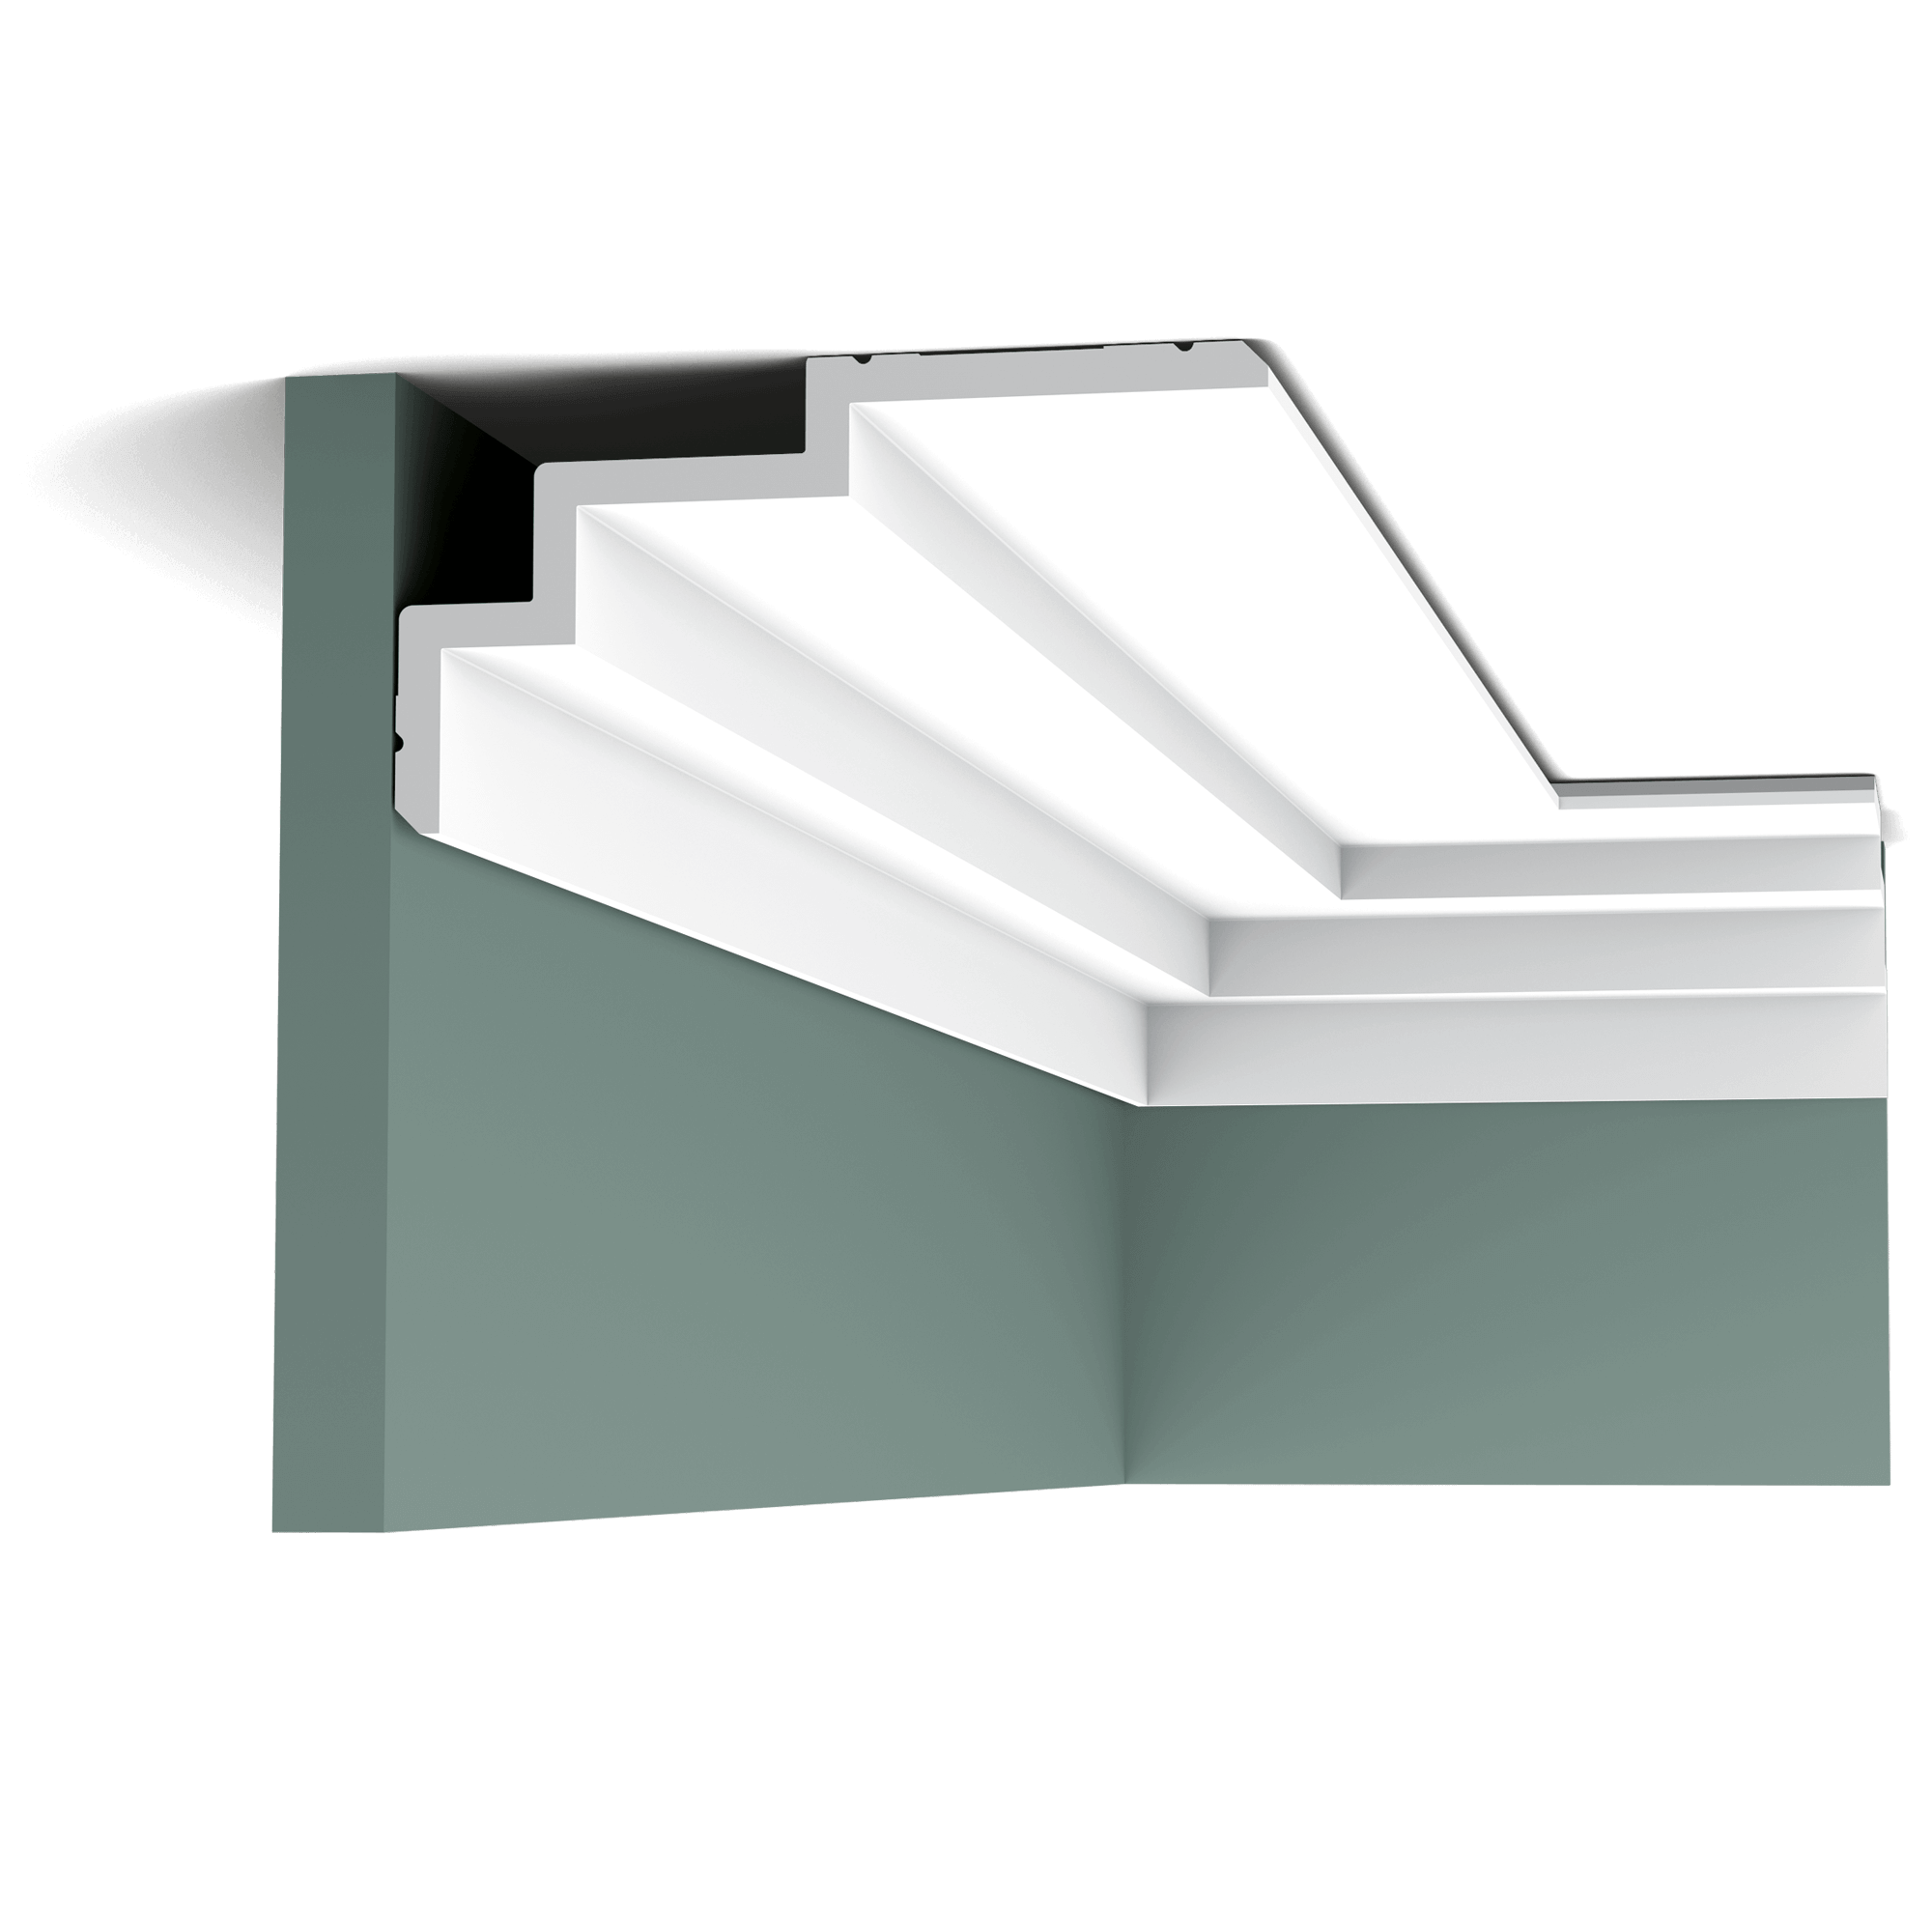 c392 cornice moulding d8c4 A clean, modern profile from the Steps range. The angled corners above and below provide additional subtle shadow lines. Designed by Orio Tonini.